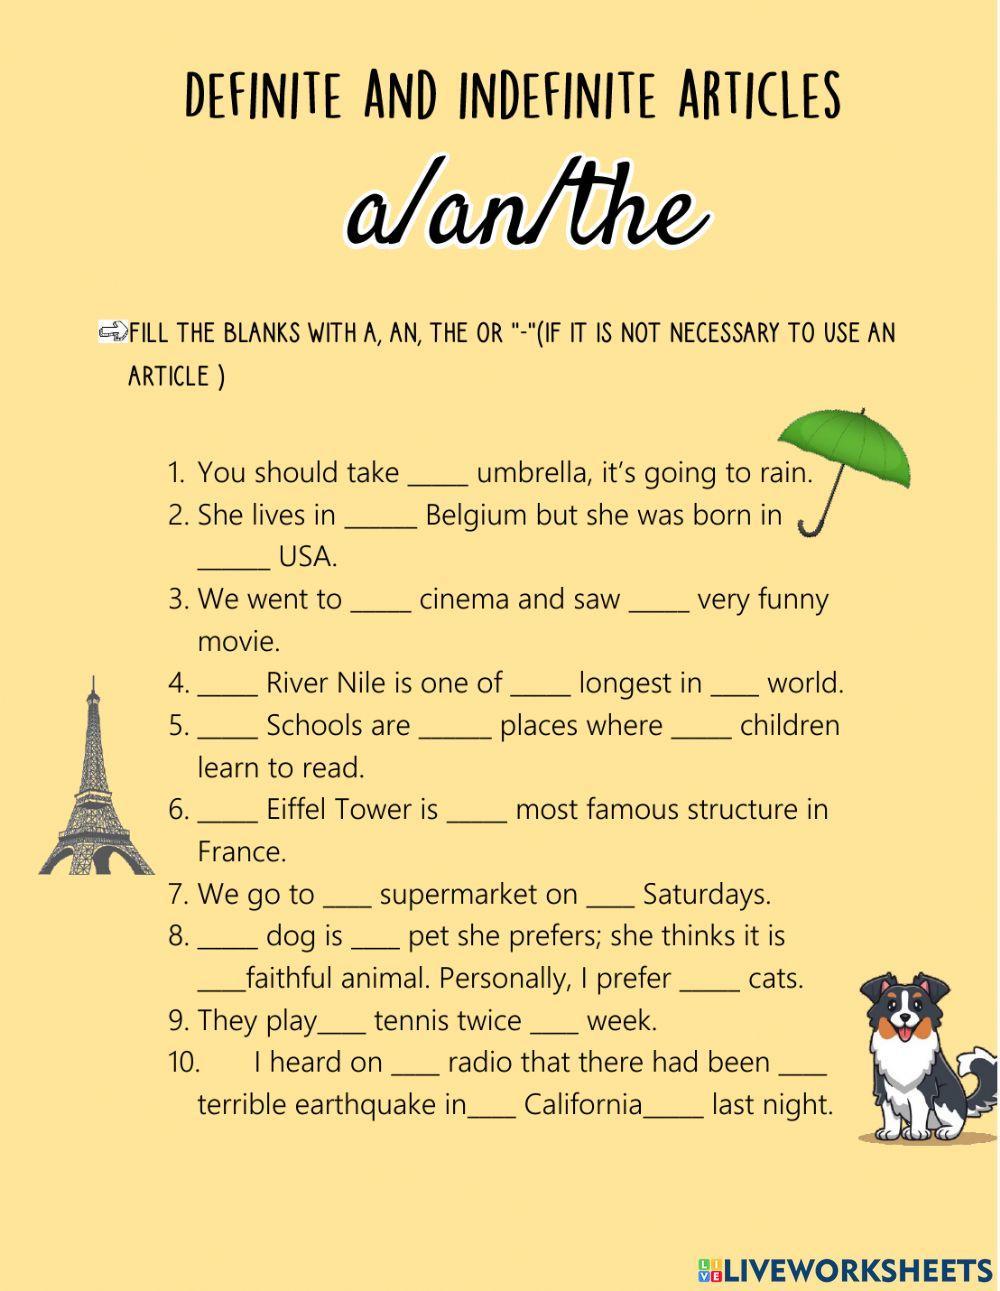 Definite and indefinite articles: a- an - the